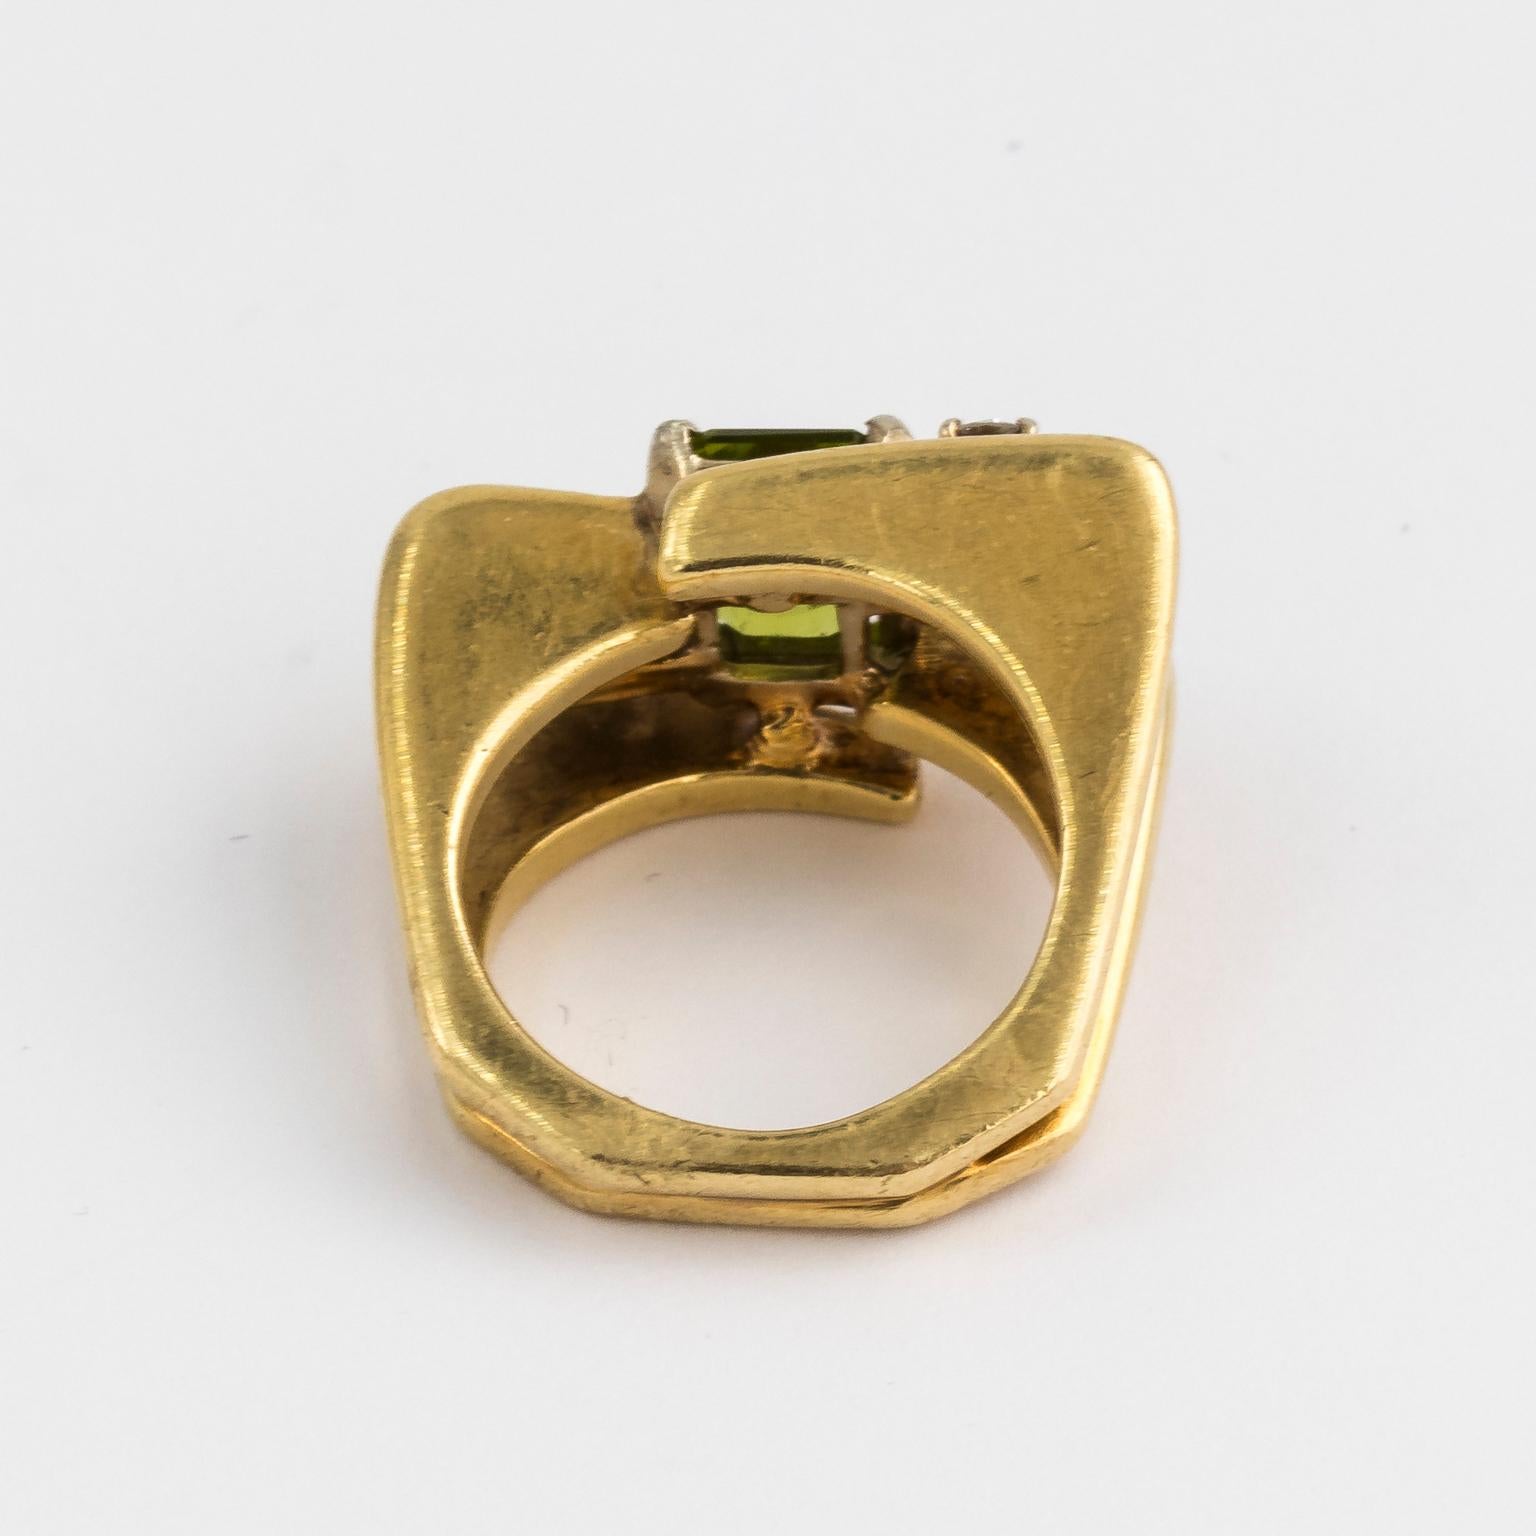 Circa 1970s 18 Karat Gold and Green Peridot ring with 0.50 carats of diamond. The center stone is green peridot flanked by two diamonds in a contemporary setting.
